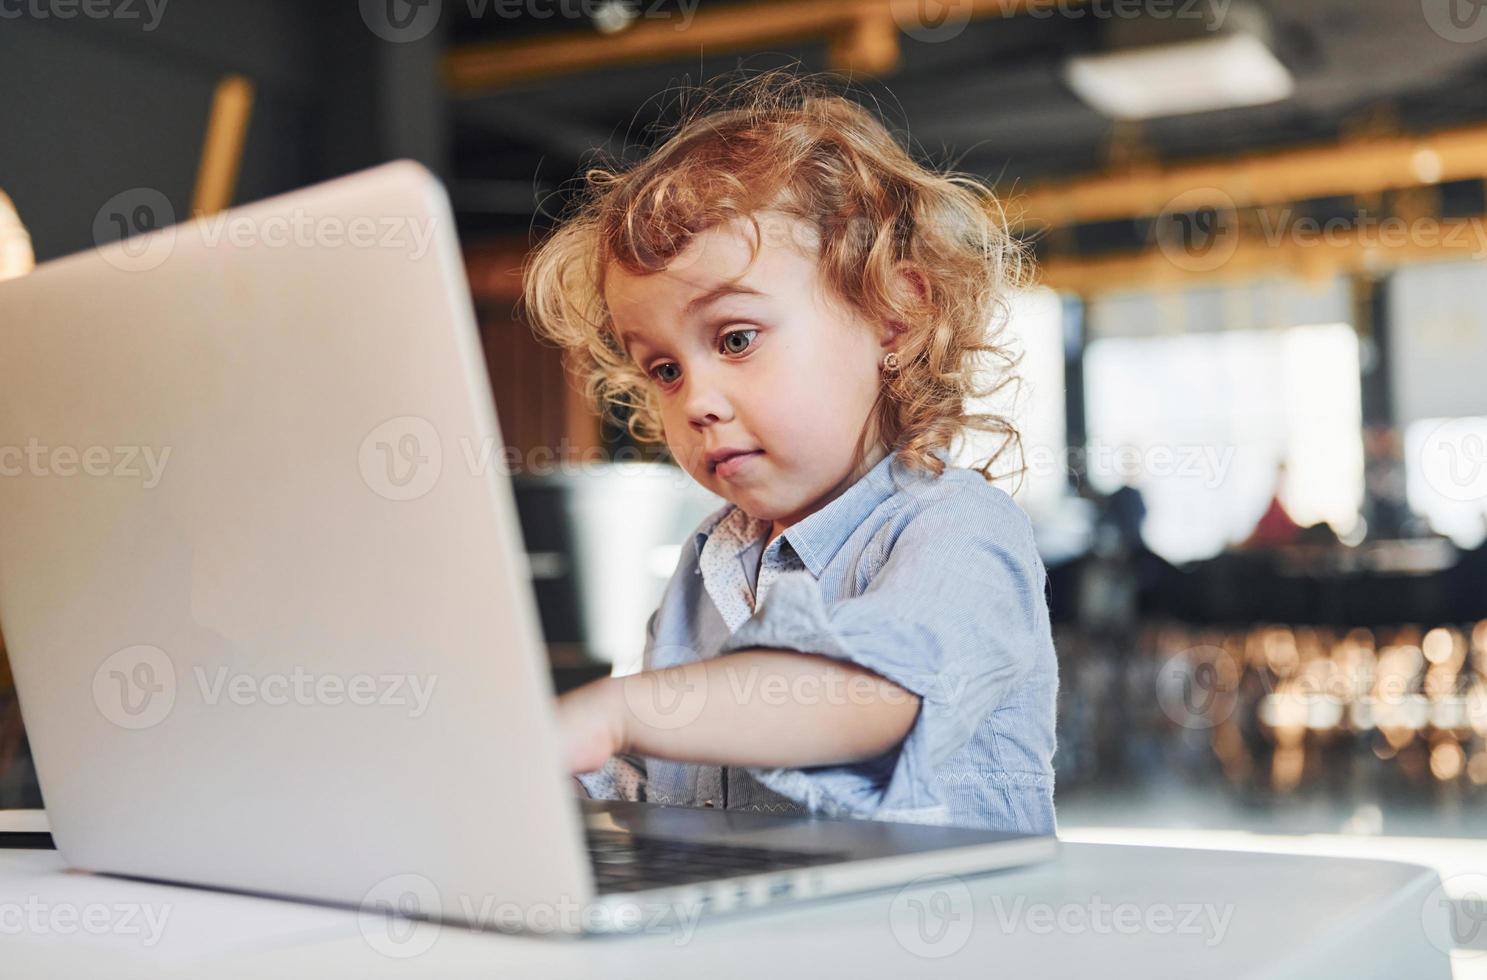 Smart child in casual clothes using laptop for education purposes or fun photo